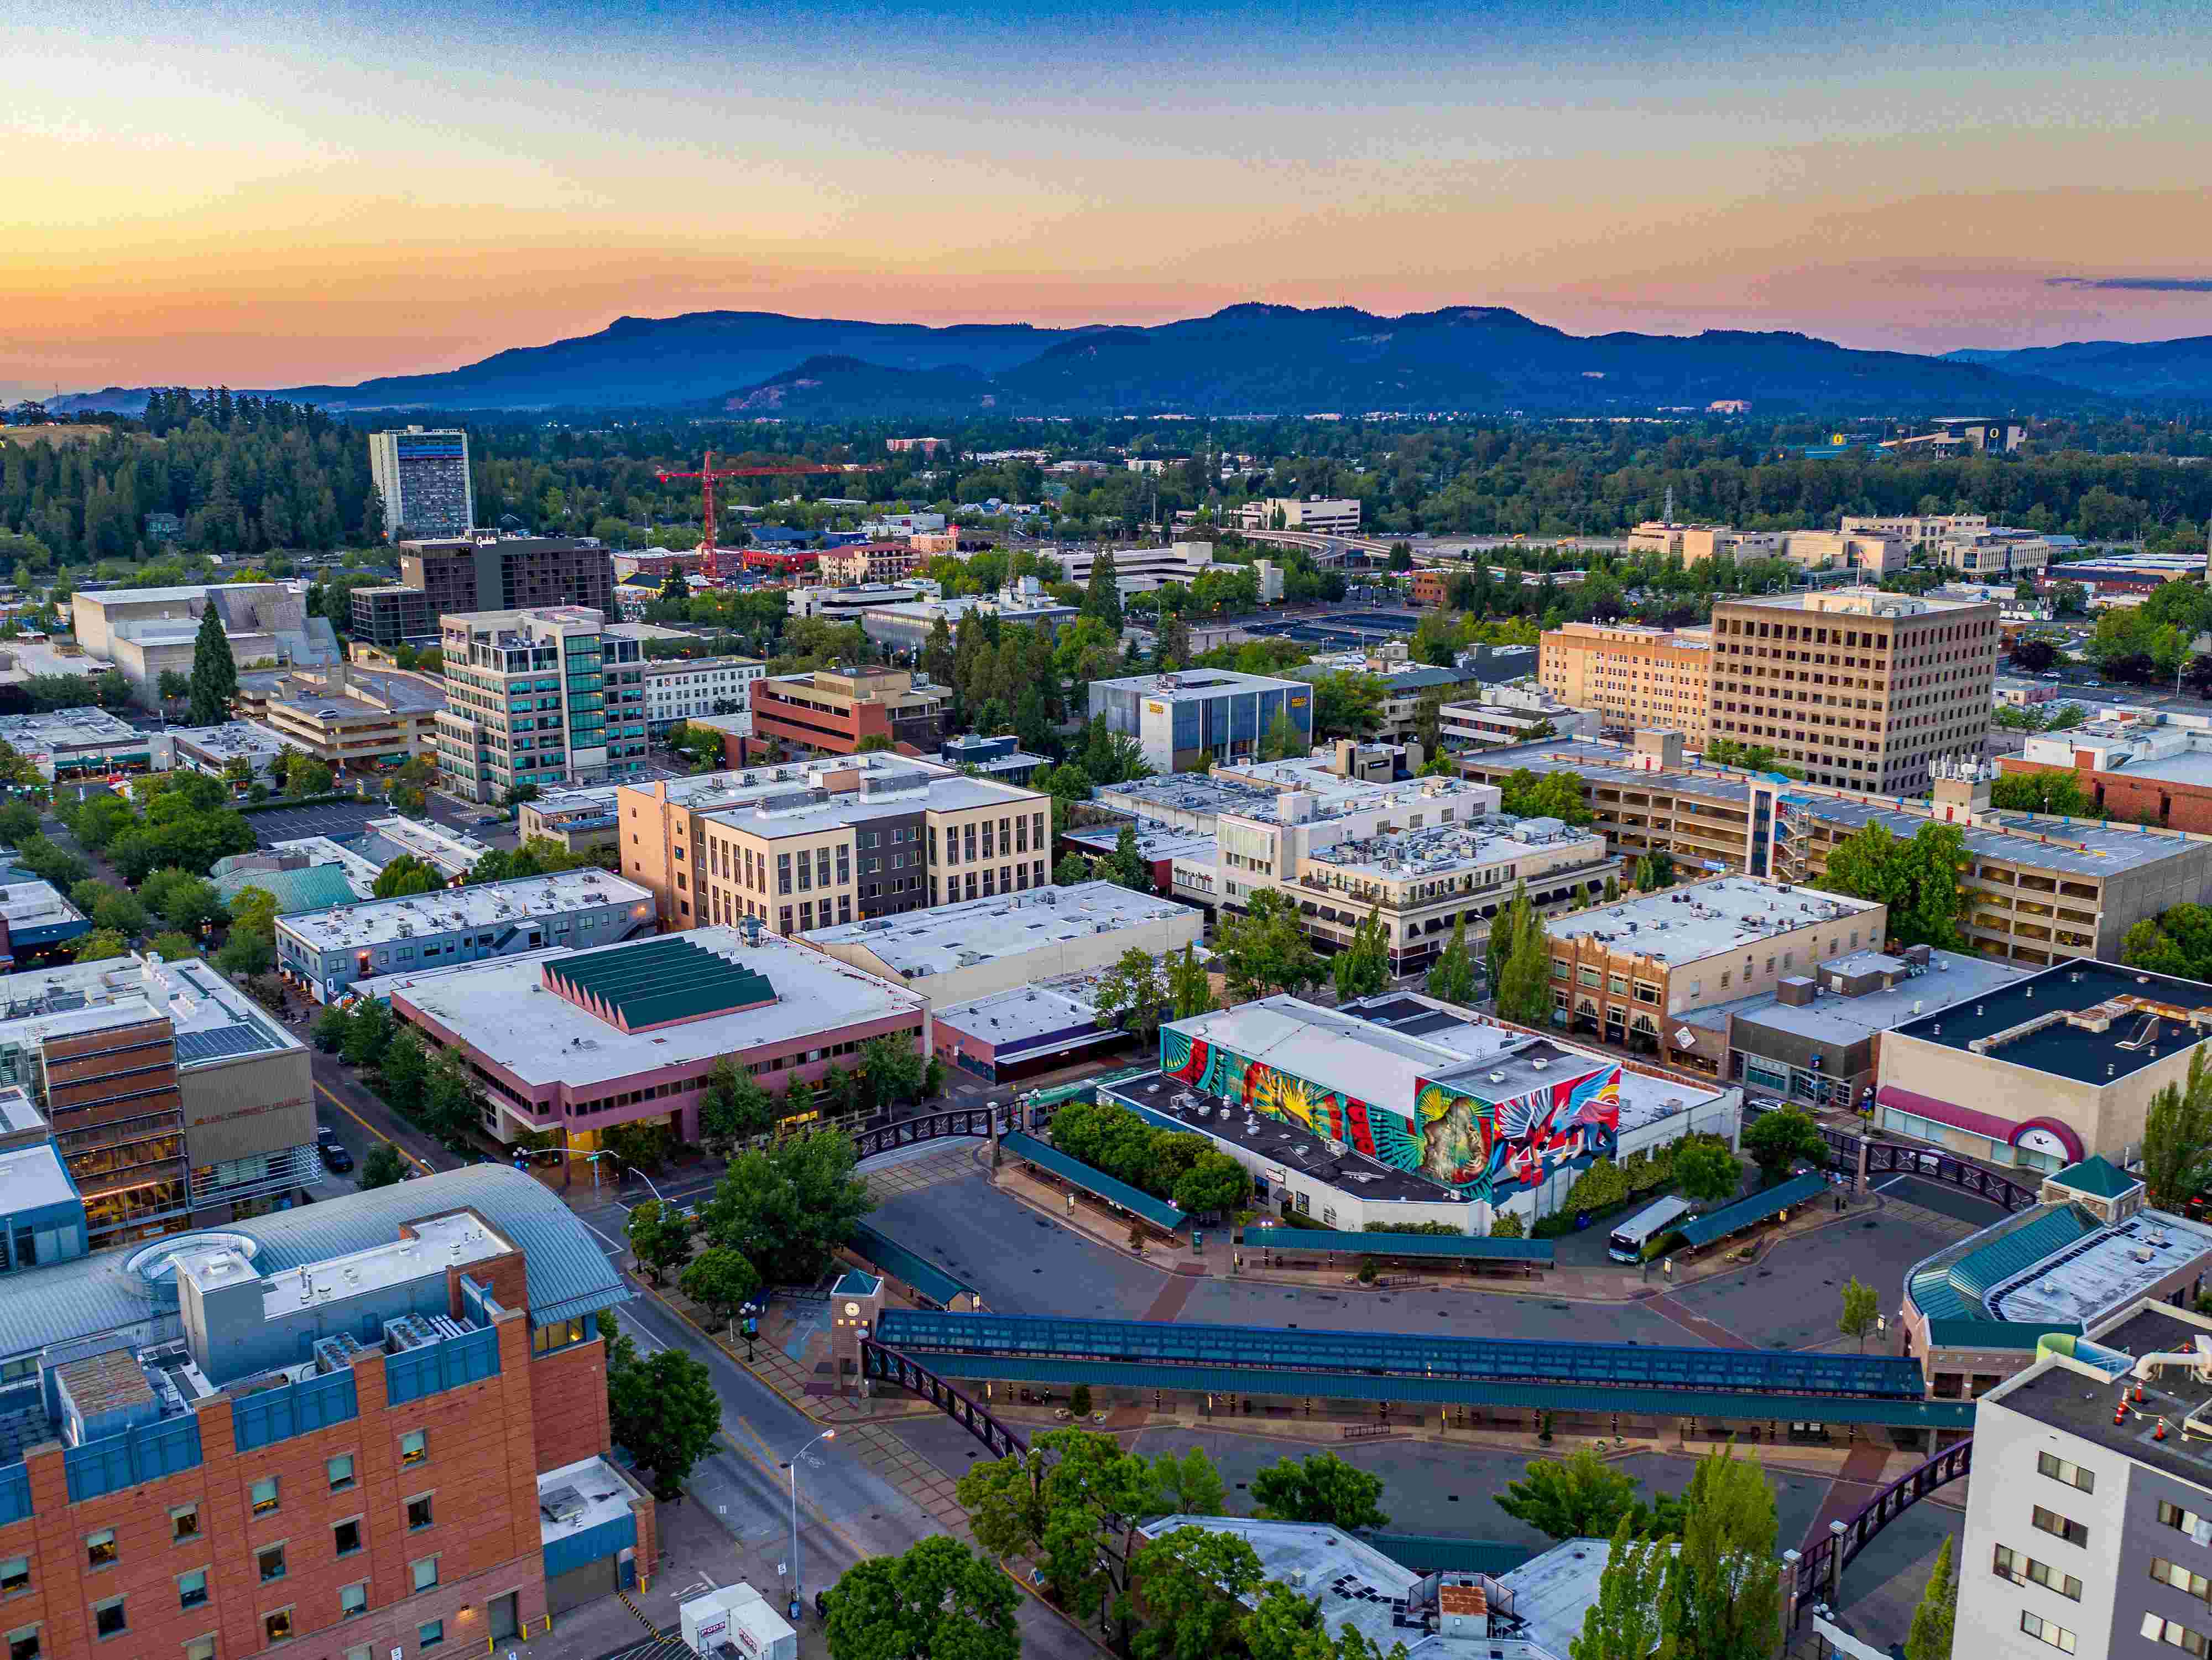 Aerial view overlooking the city of Bend, Oregon